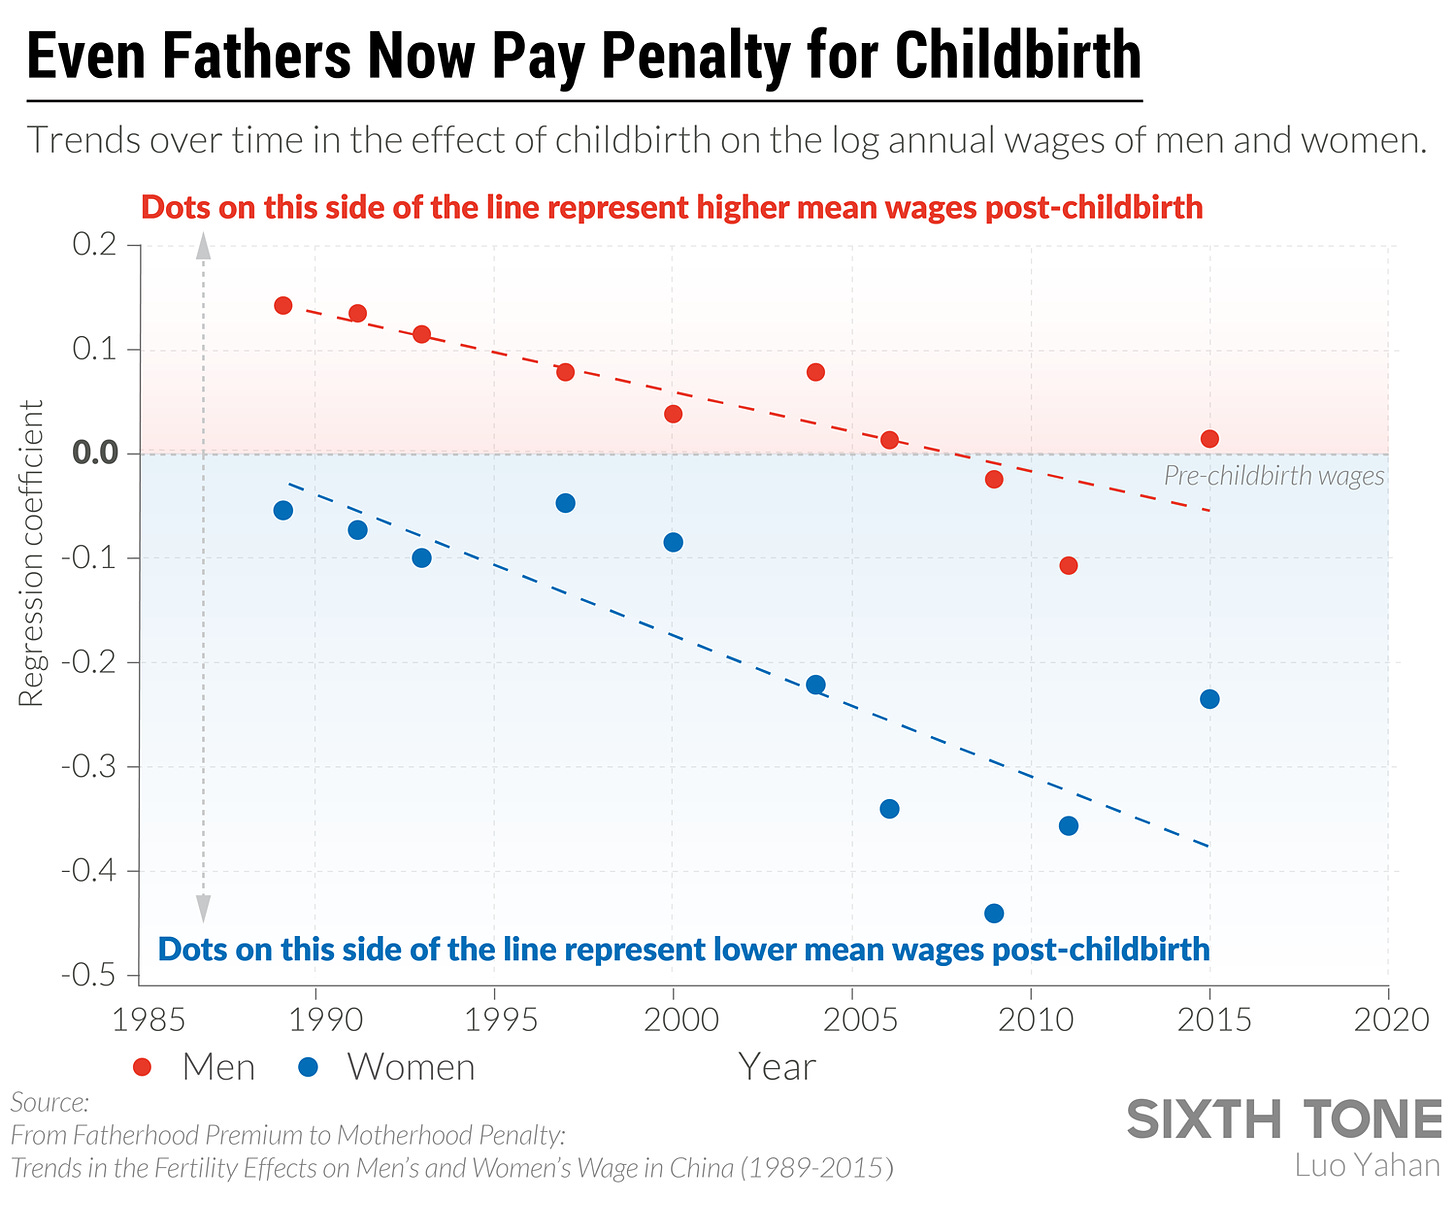 Negative wage effect for fathers post-childbirth in China